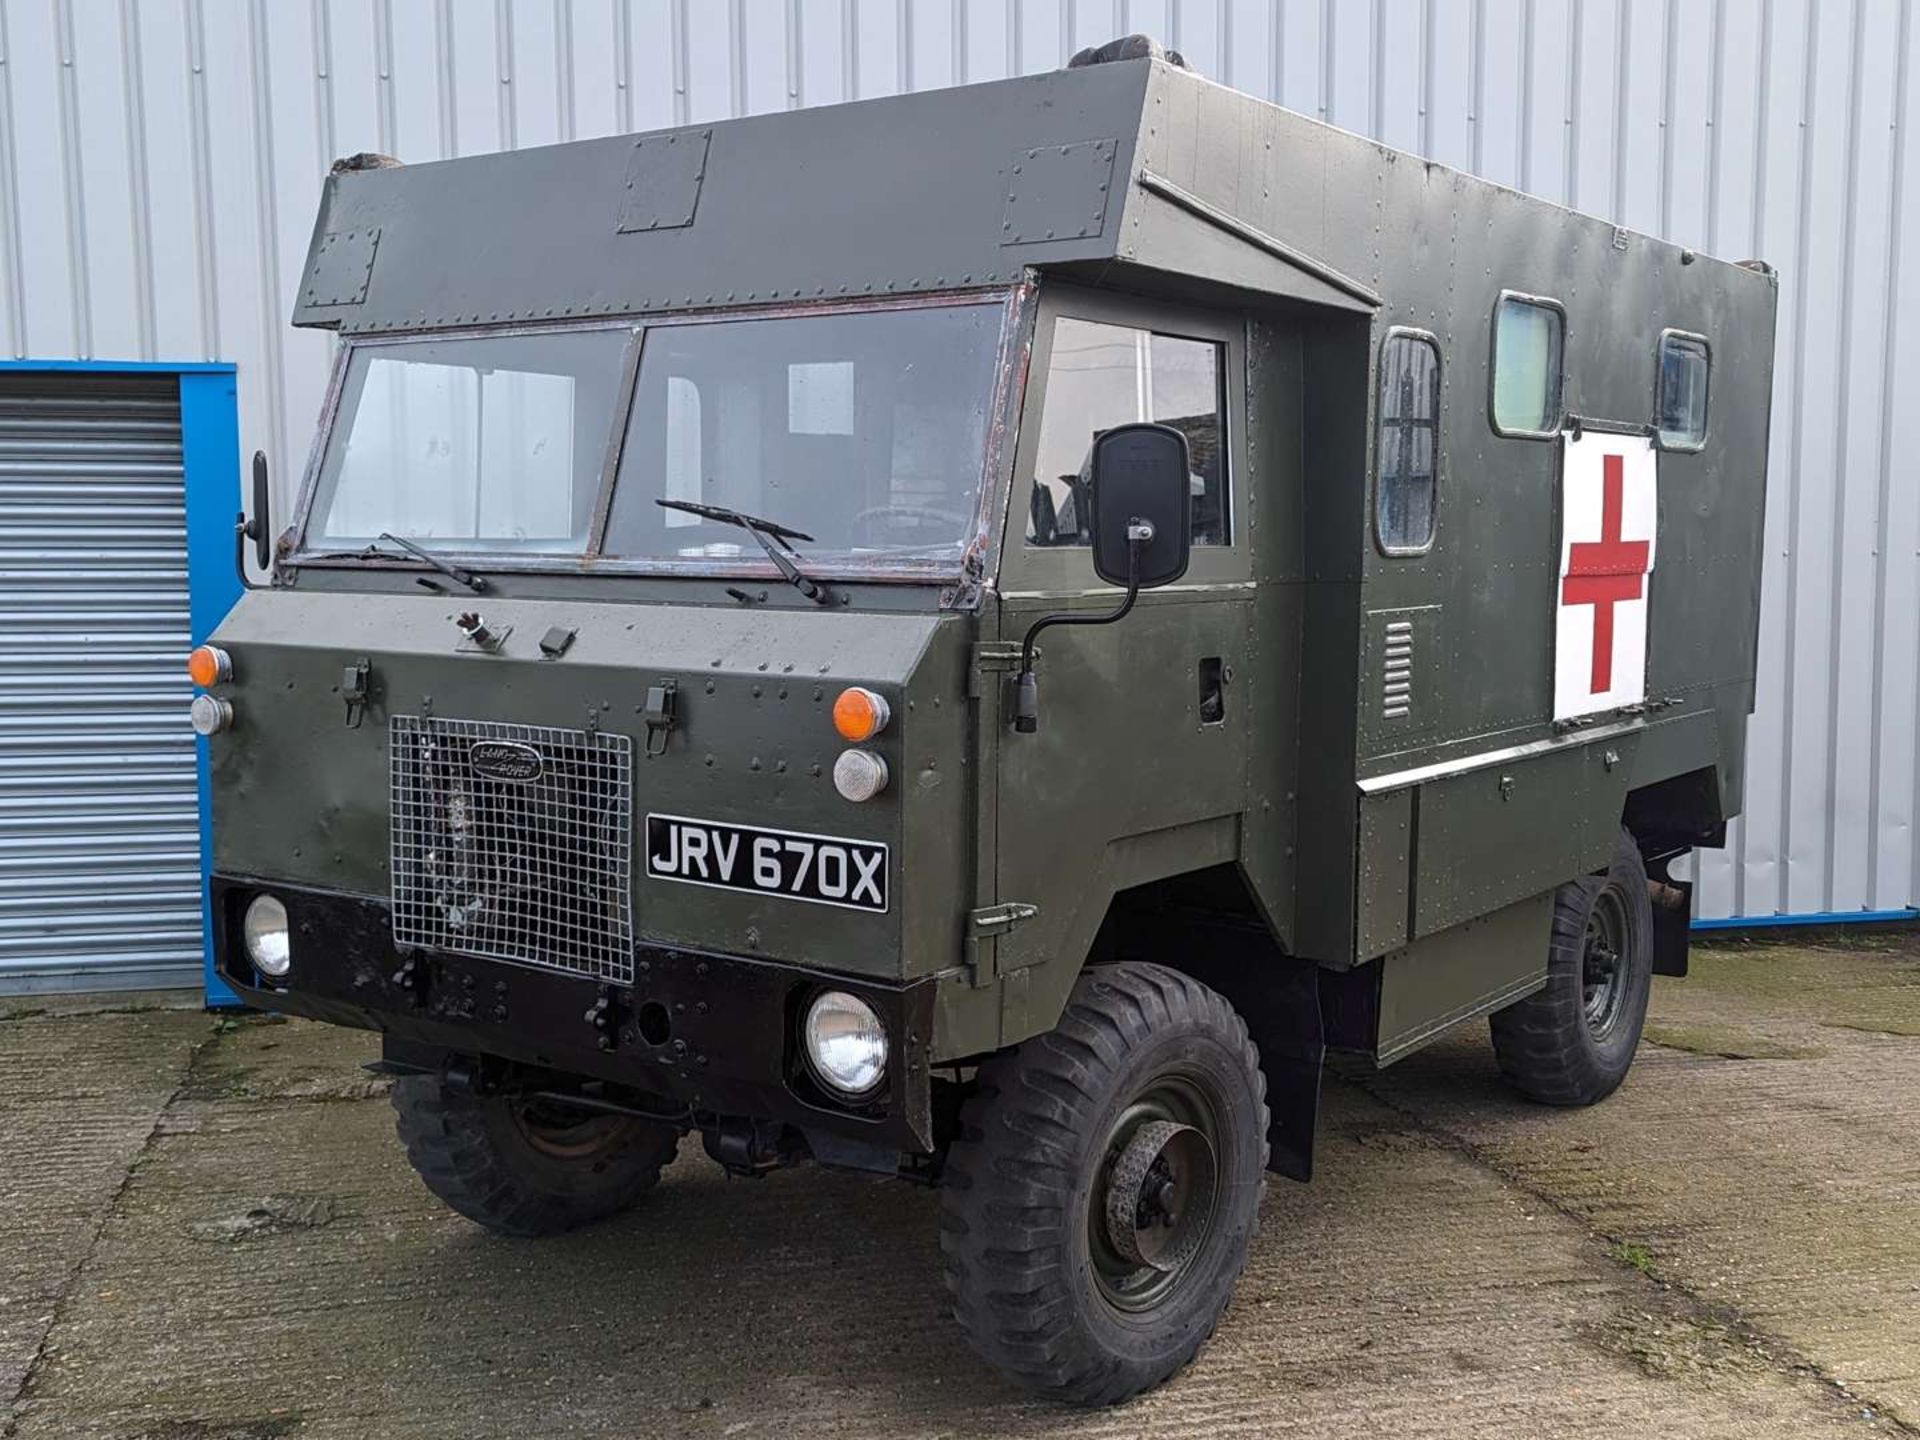 1977 LAND ROVER FORWARD CONTROL FC101 LHD - Image 3 of 25